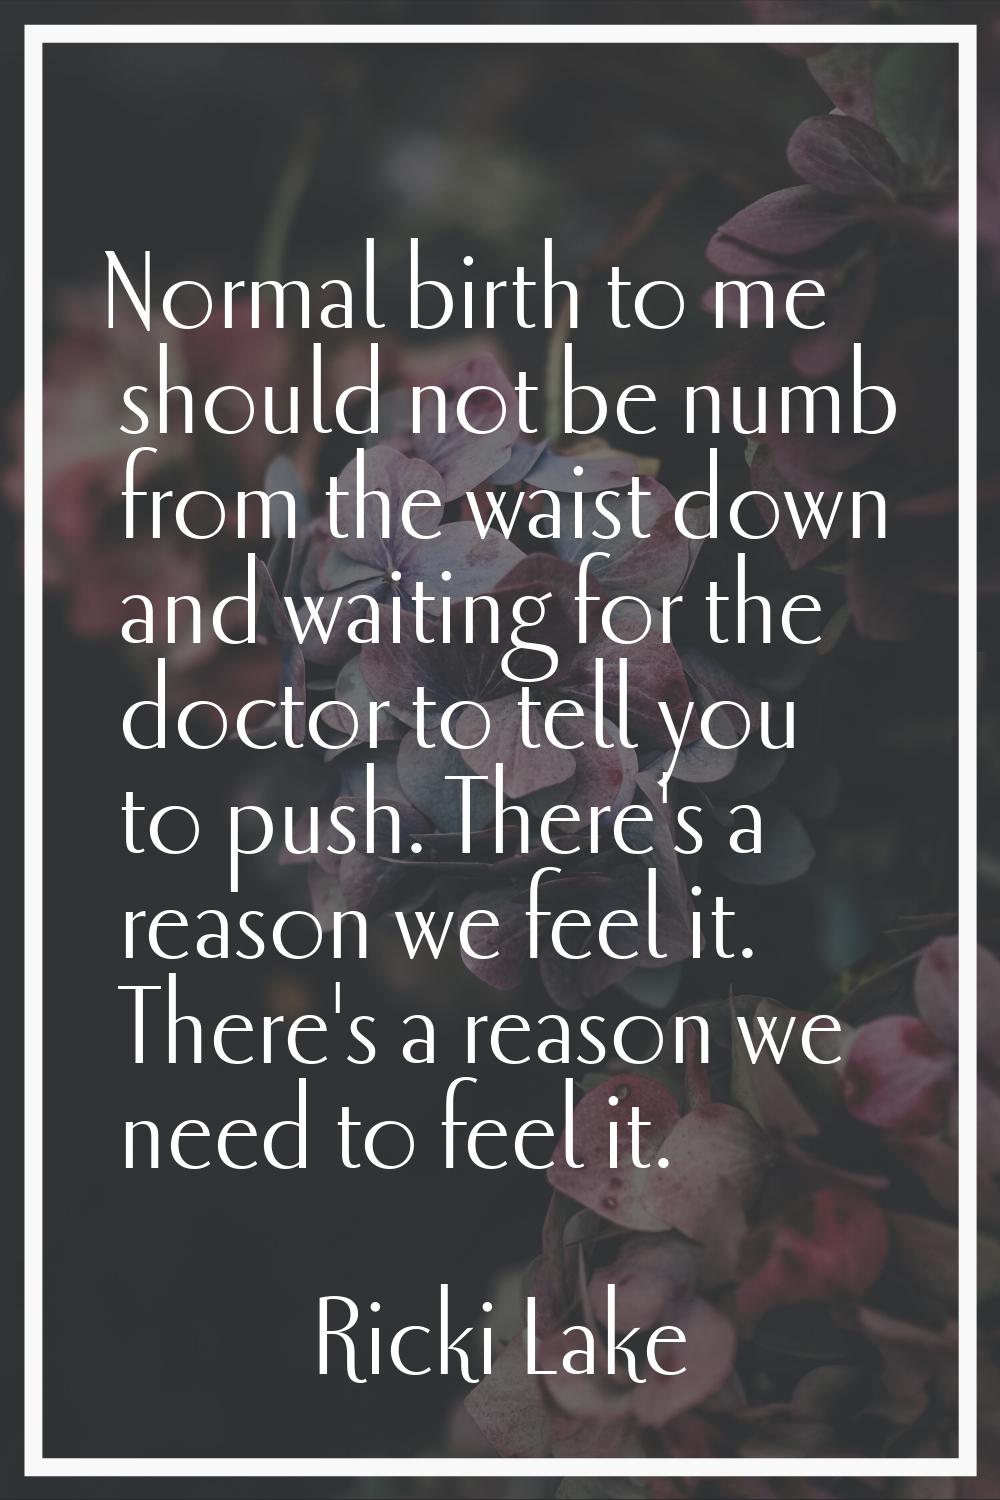 Normal birth to me should not be numb from the waist down and waiting for the doctor to tell you to